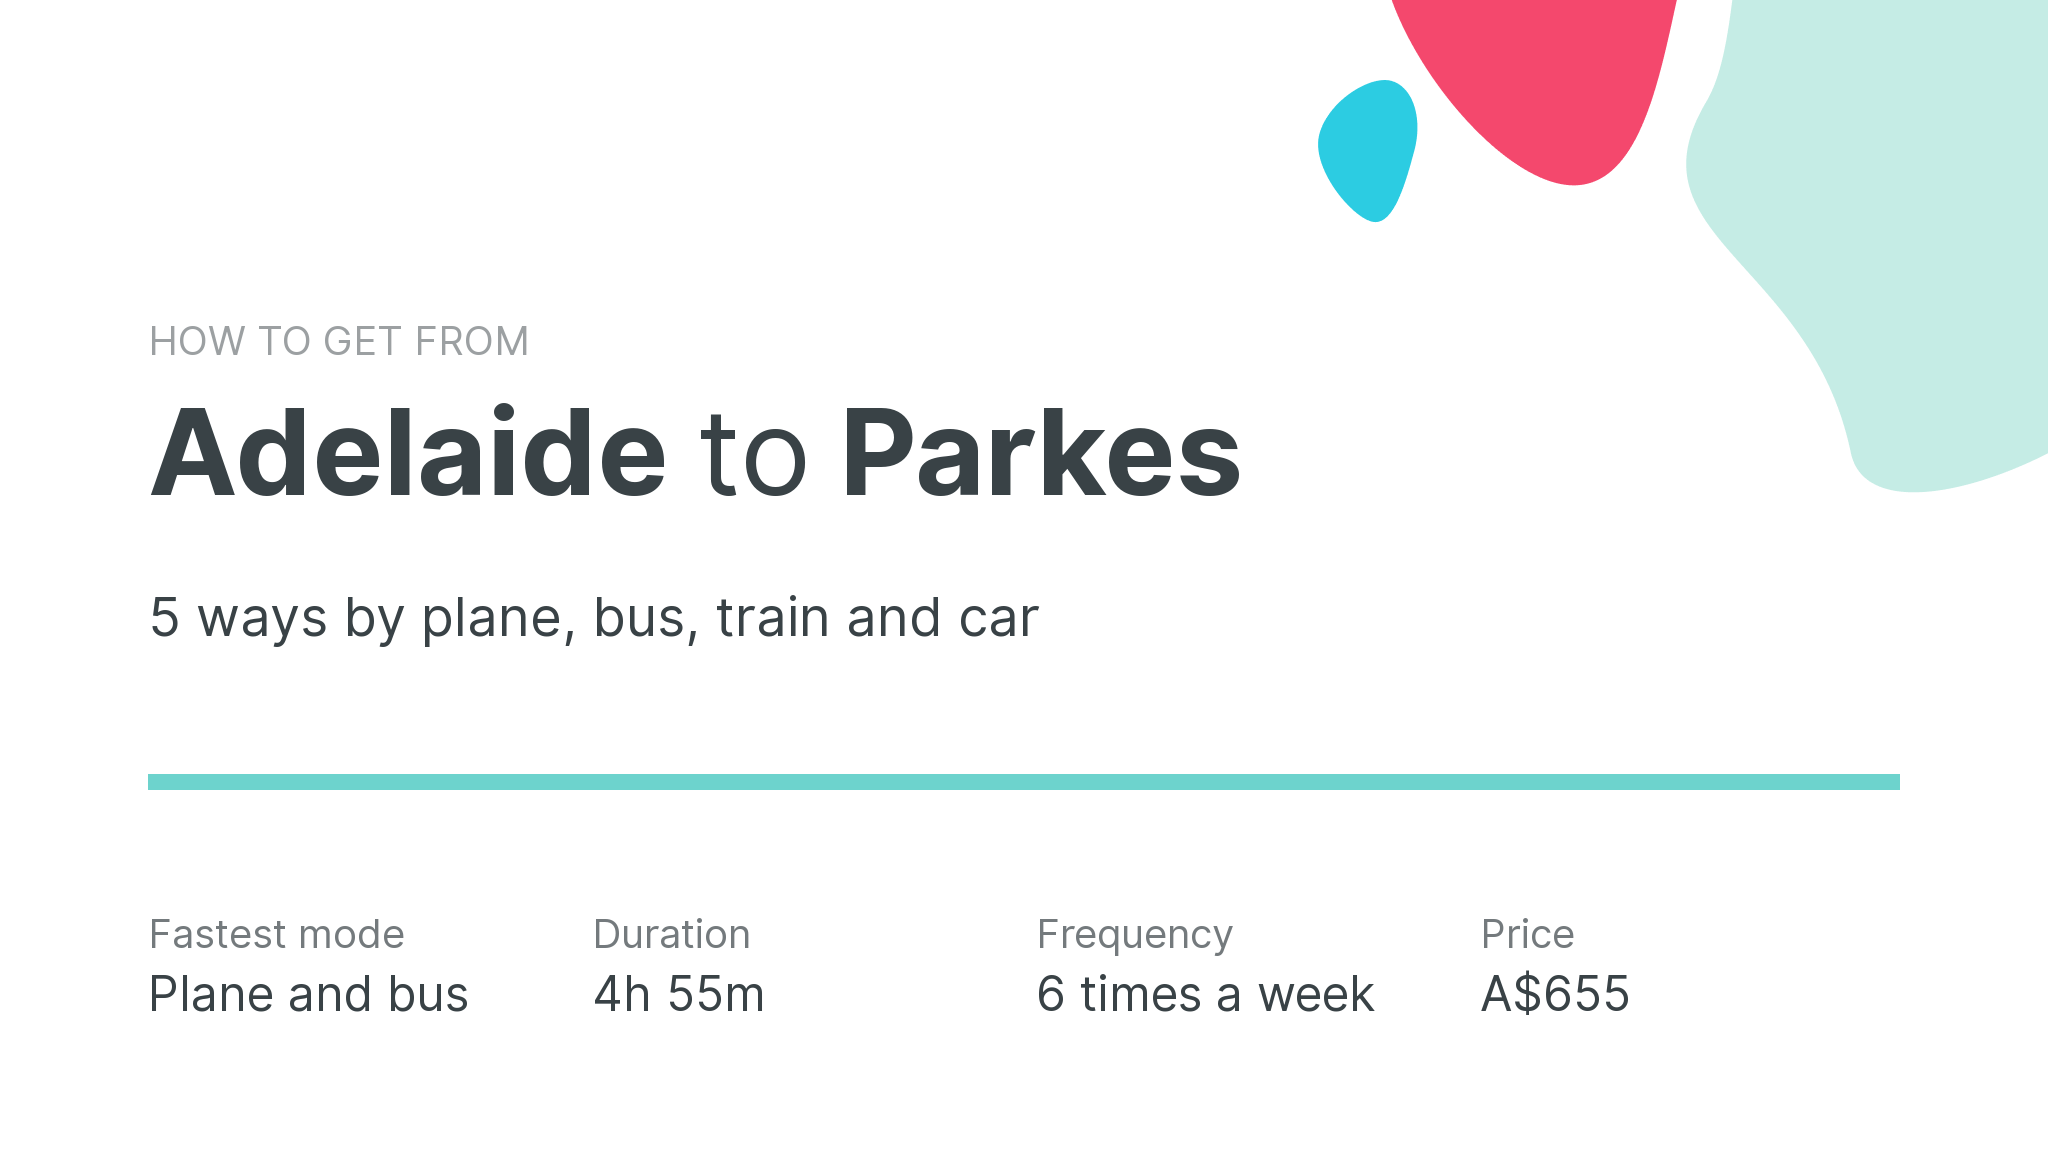 How do I get from Adelaide to Parkes